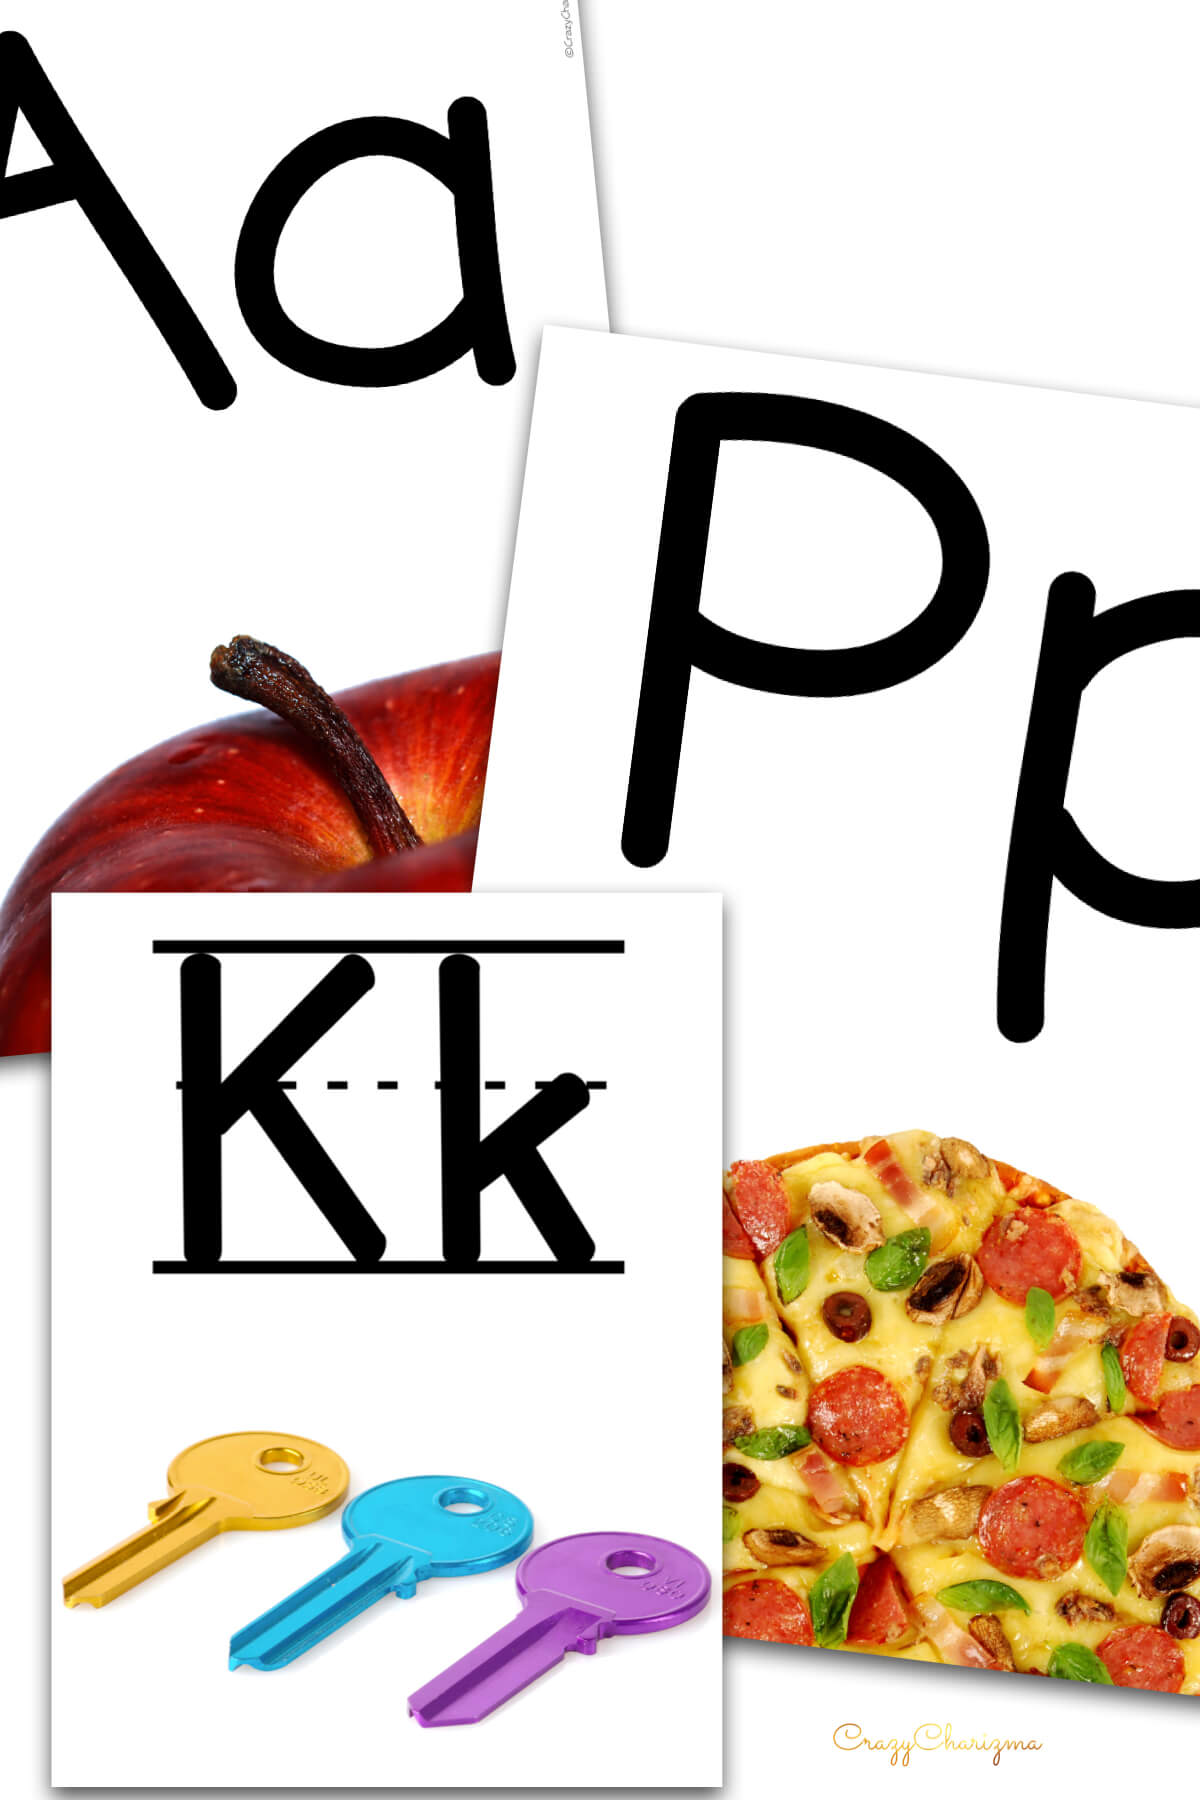 Use these bright printable alphabet posters in your classroom or homeschool. Two versions (letters and letters on lined paper) are available. Use as decor for classroom or flashcards.